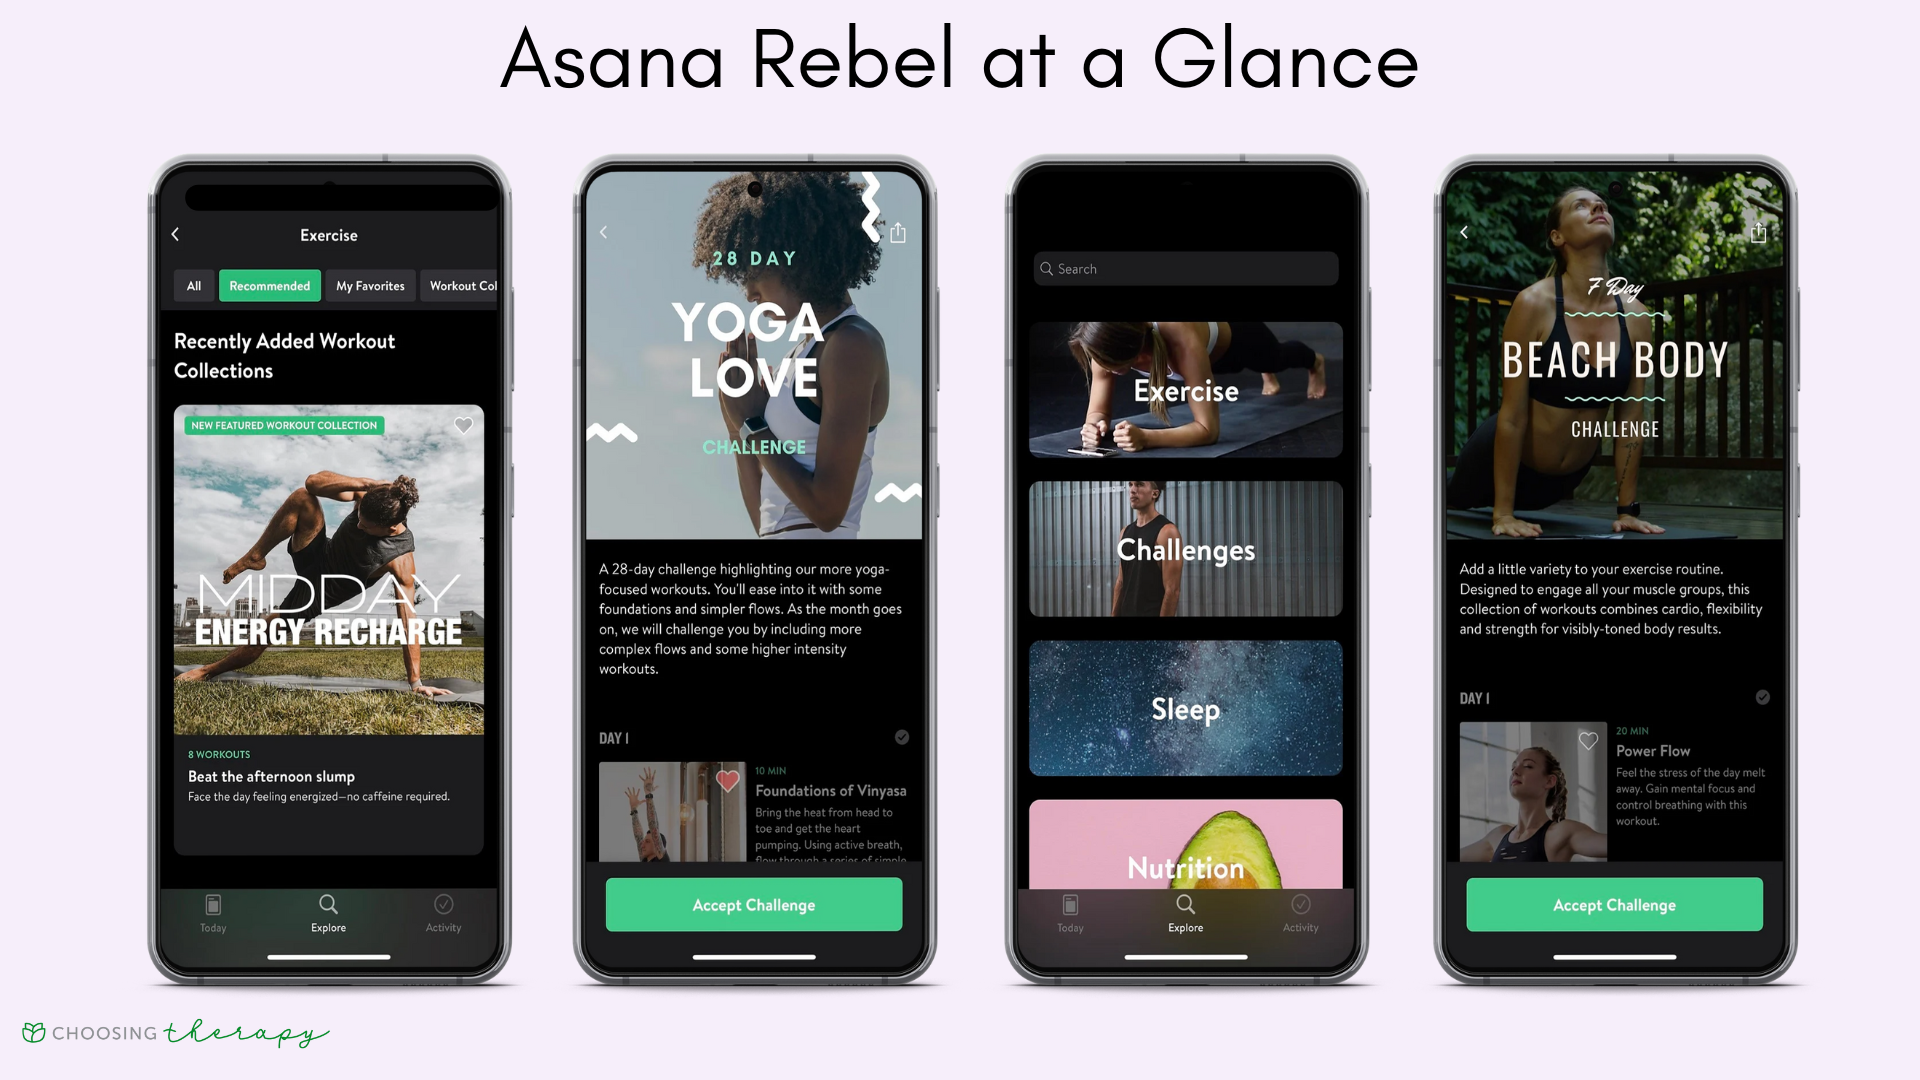 Four images of the key features of the Asana Rebel yoga app